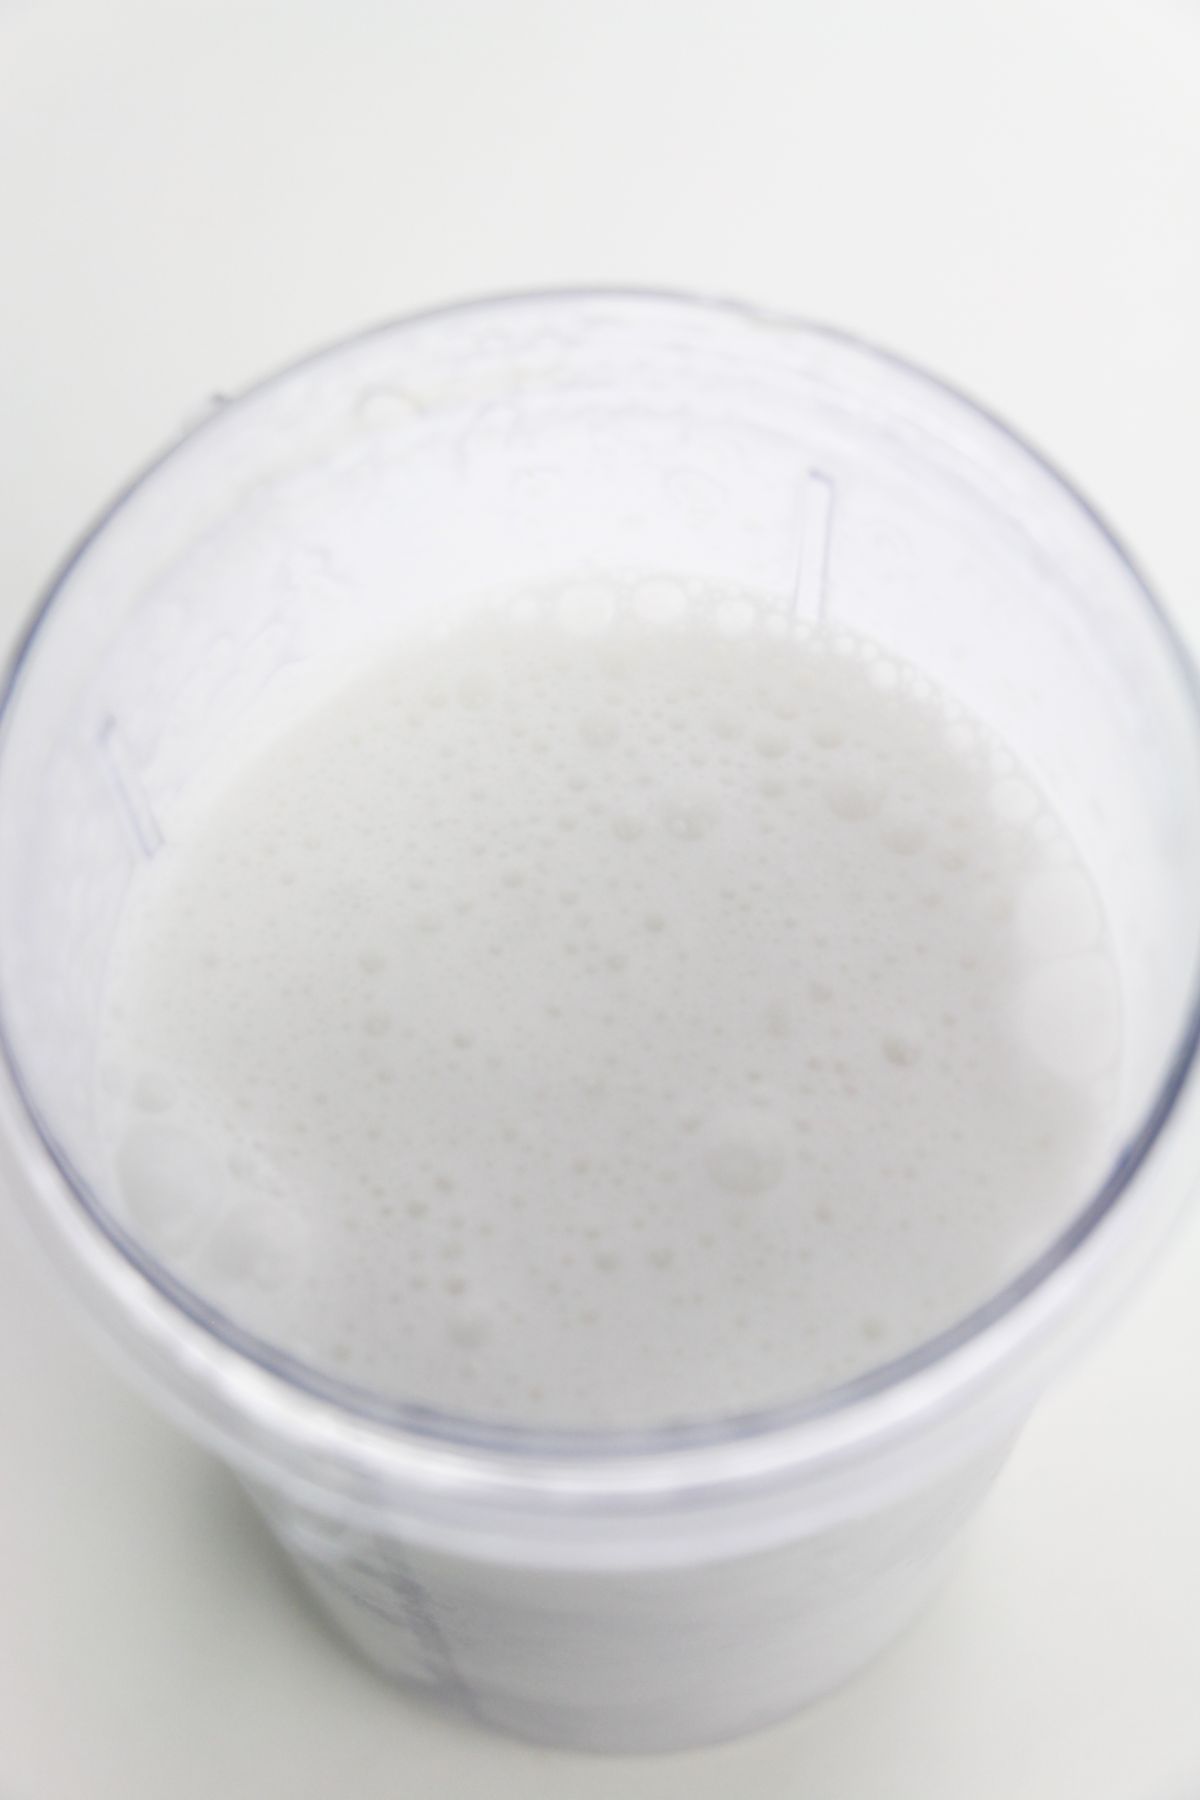 Whipped Pina Colada Recipe With Coconut Milk in a blender.